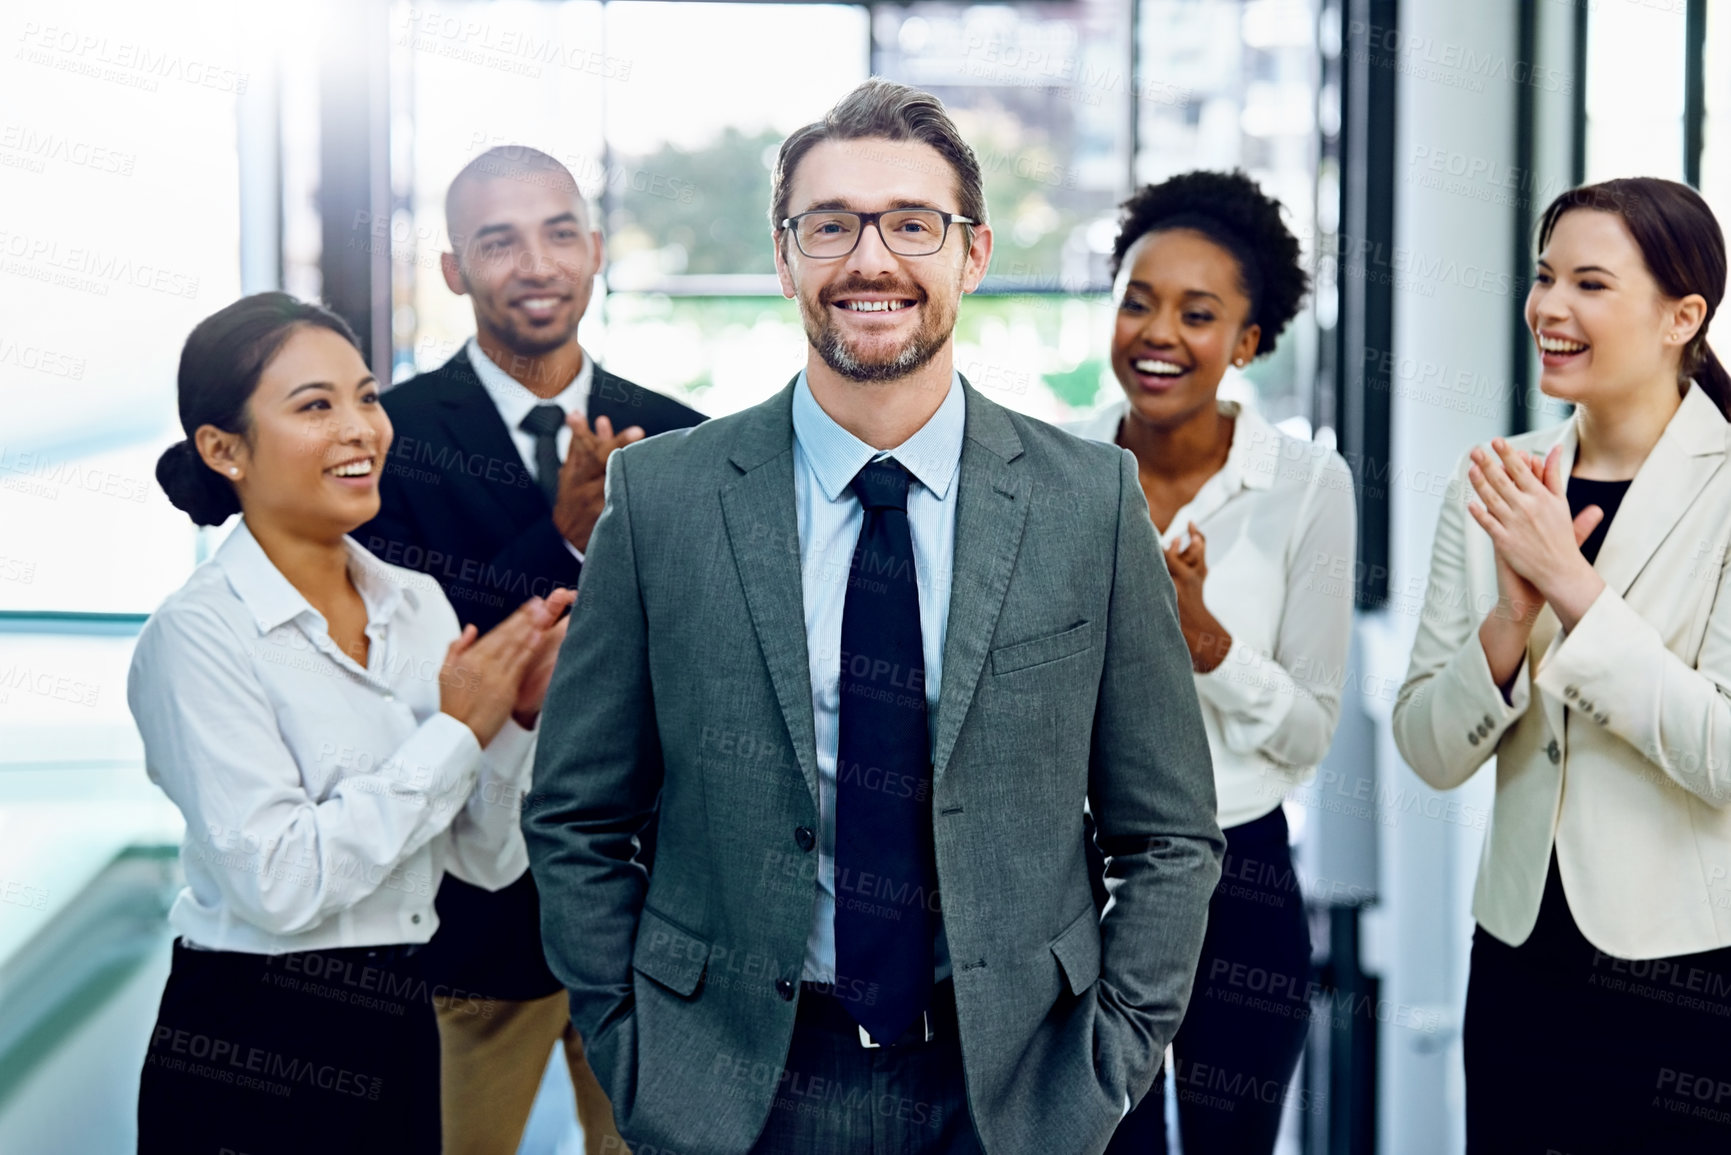 Buy stock photo Applause, portrait and businessman with team in office for good news, achievement or goal. Happy, gratitude and group of financial advisors clapping hands for mature male manager in workplace.